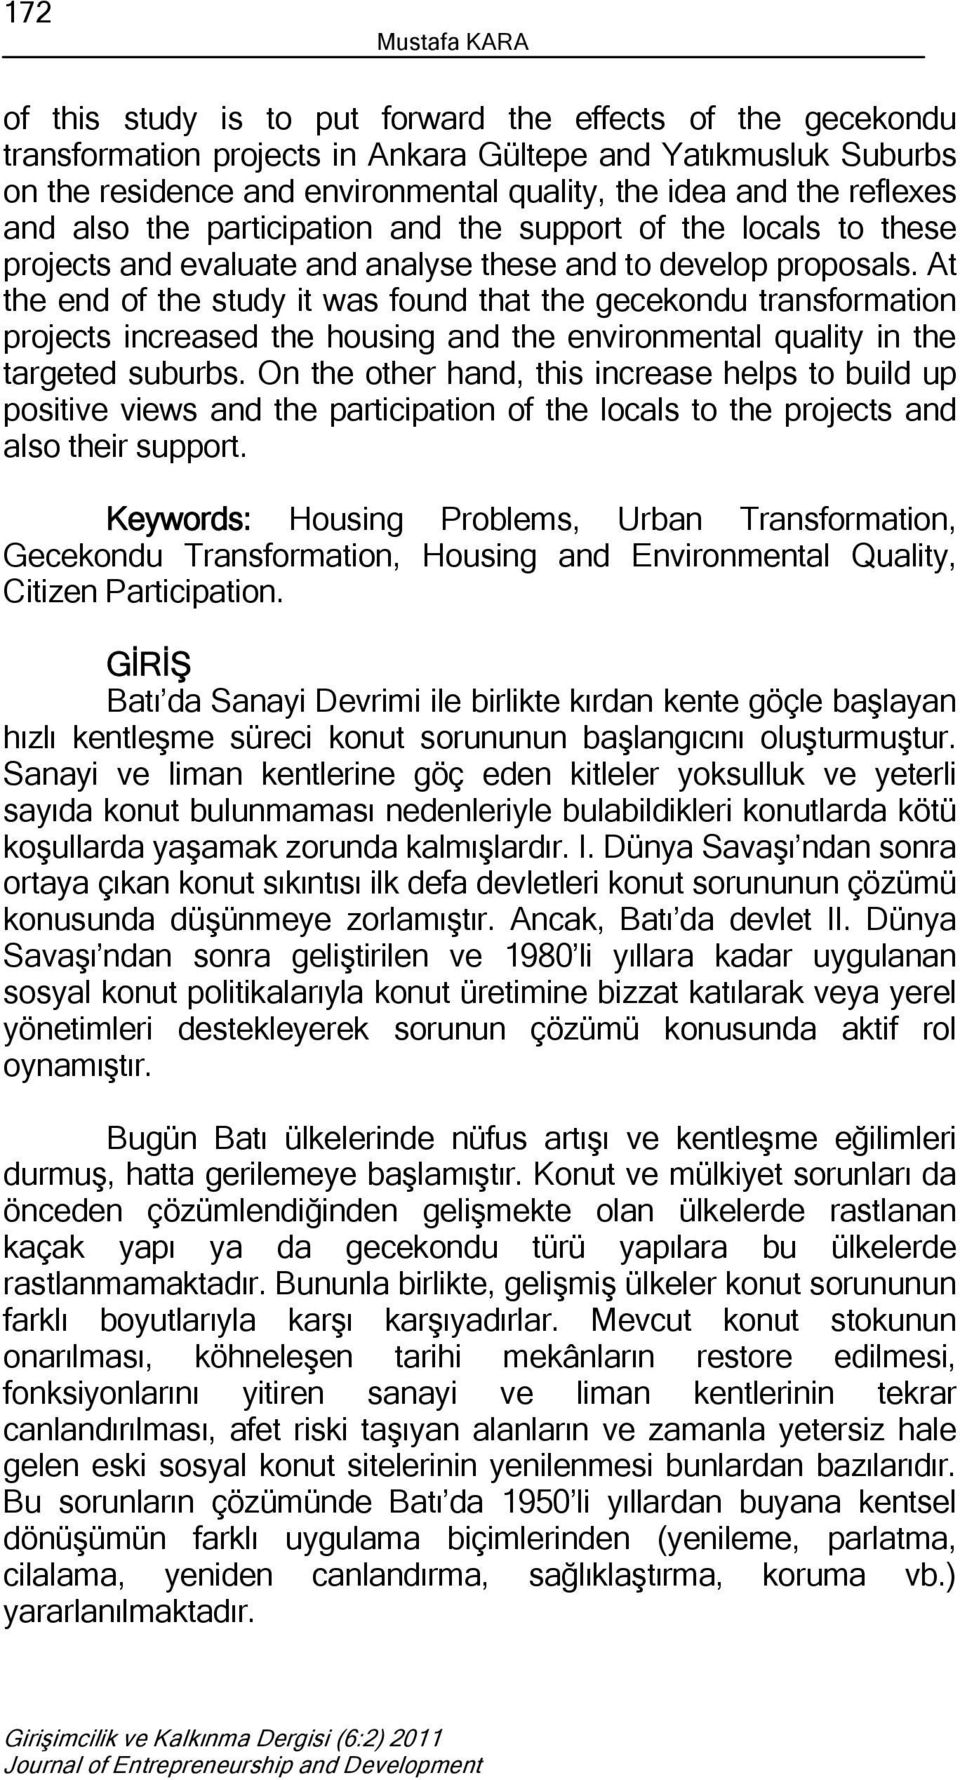 At the end of the study it was found that the gecekondu transformation projects increased the housing and the environmental quality in the targeted suburbs.